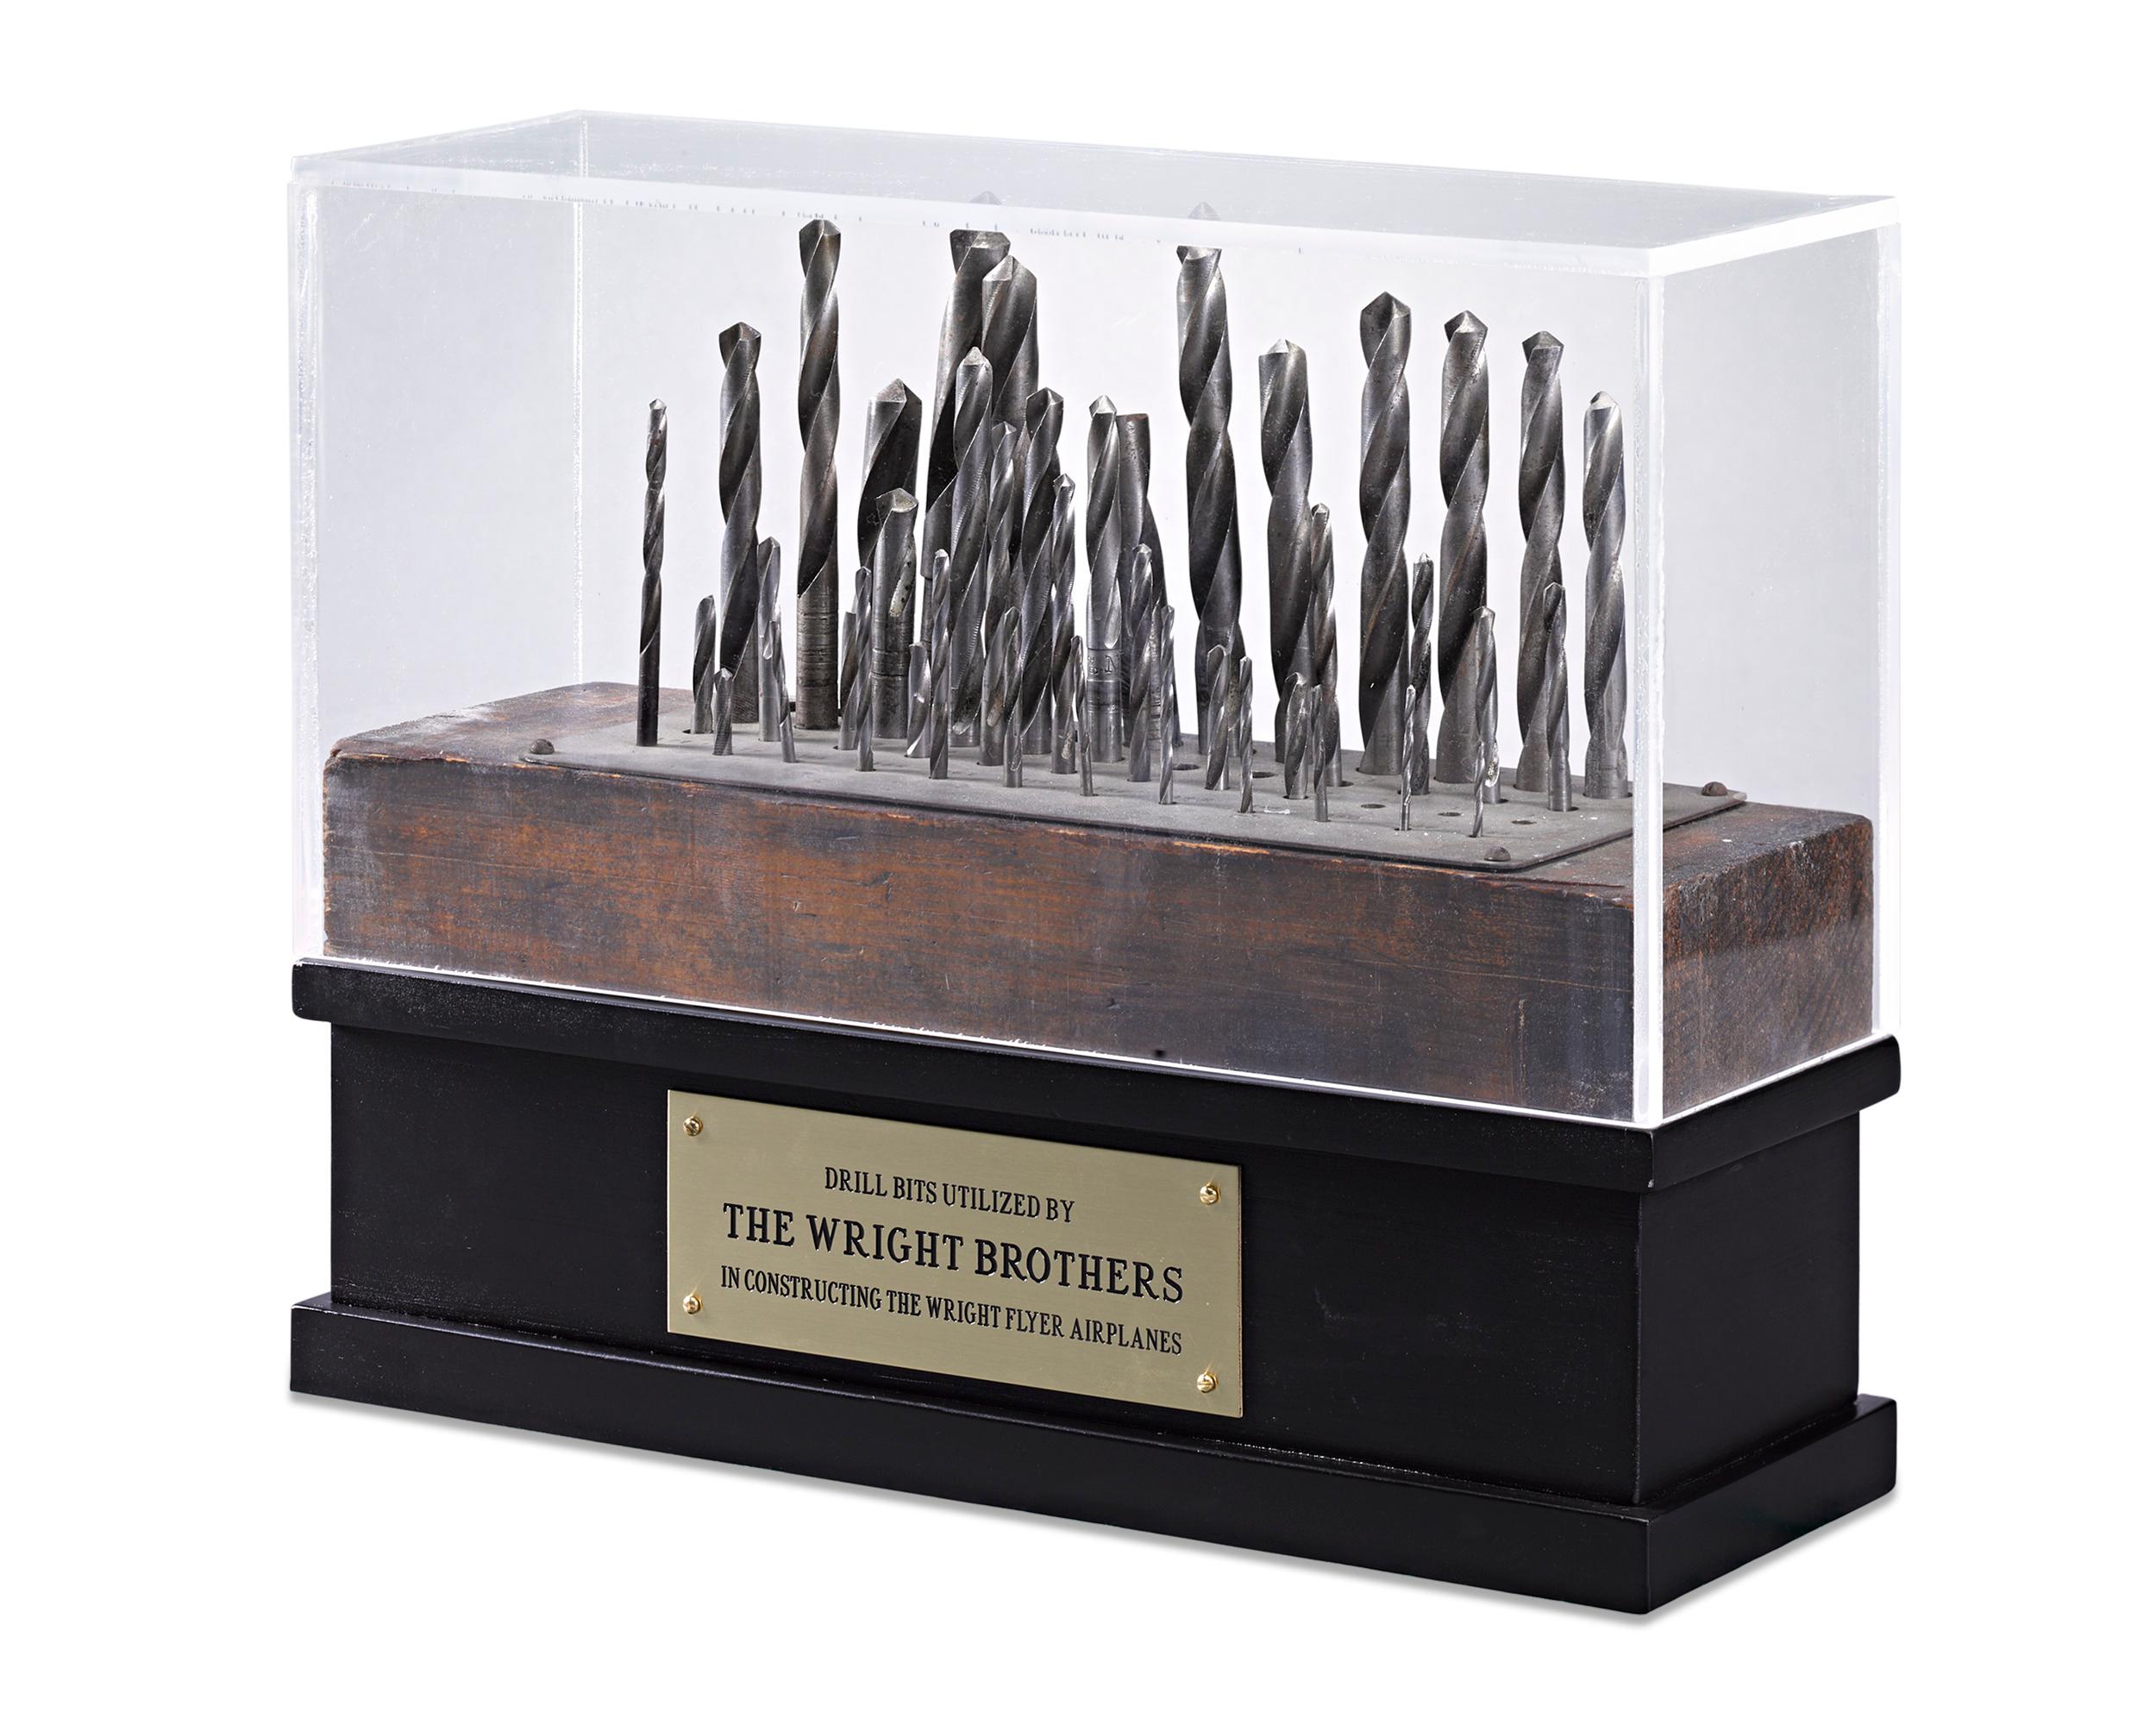 Representing American ingenuity and aviation history, this collection of drill bits was once used by the legendary Wright Brothers in the creation of their groundbreaking “Flyers.” Among the original tools the Wright Brothers used in their bicycle